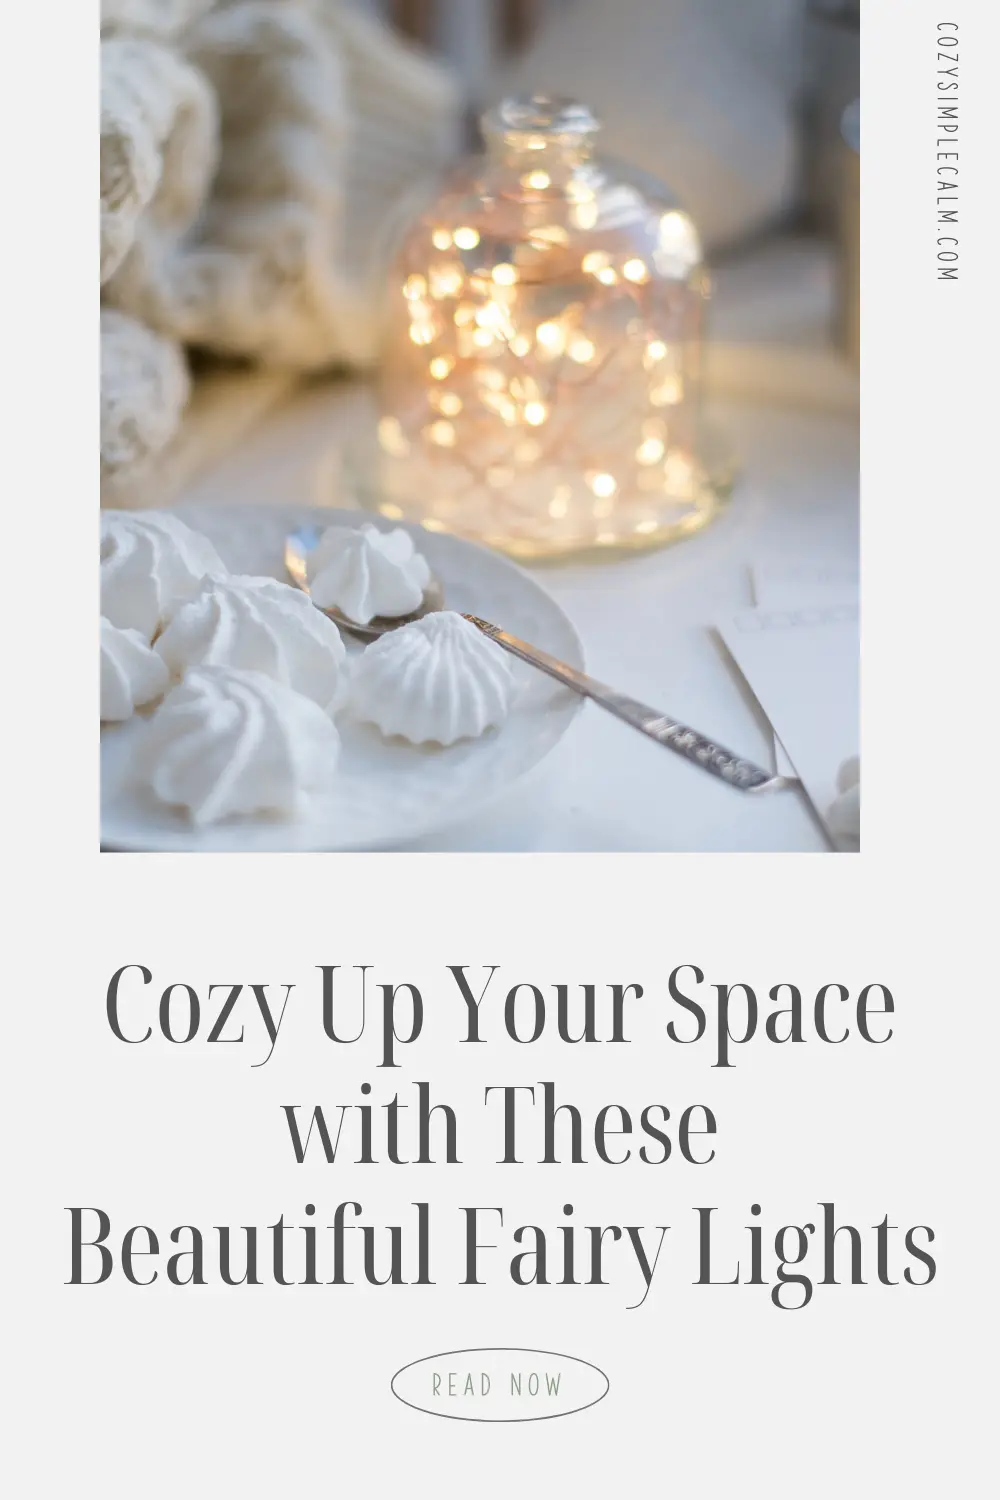 Image of warm white fairy lights inside jar - Text overlay: Cozy up your space with these beautiful fairy lights - cozysimplecalm.com